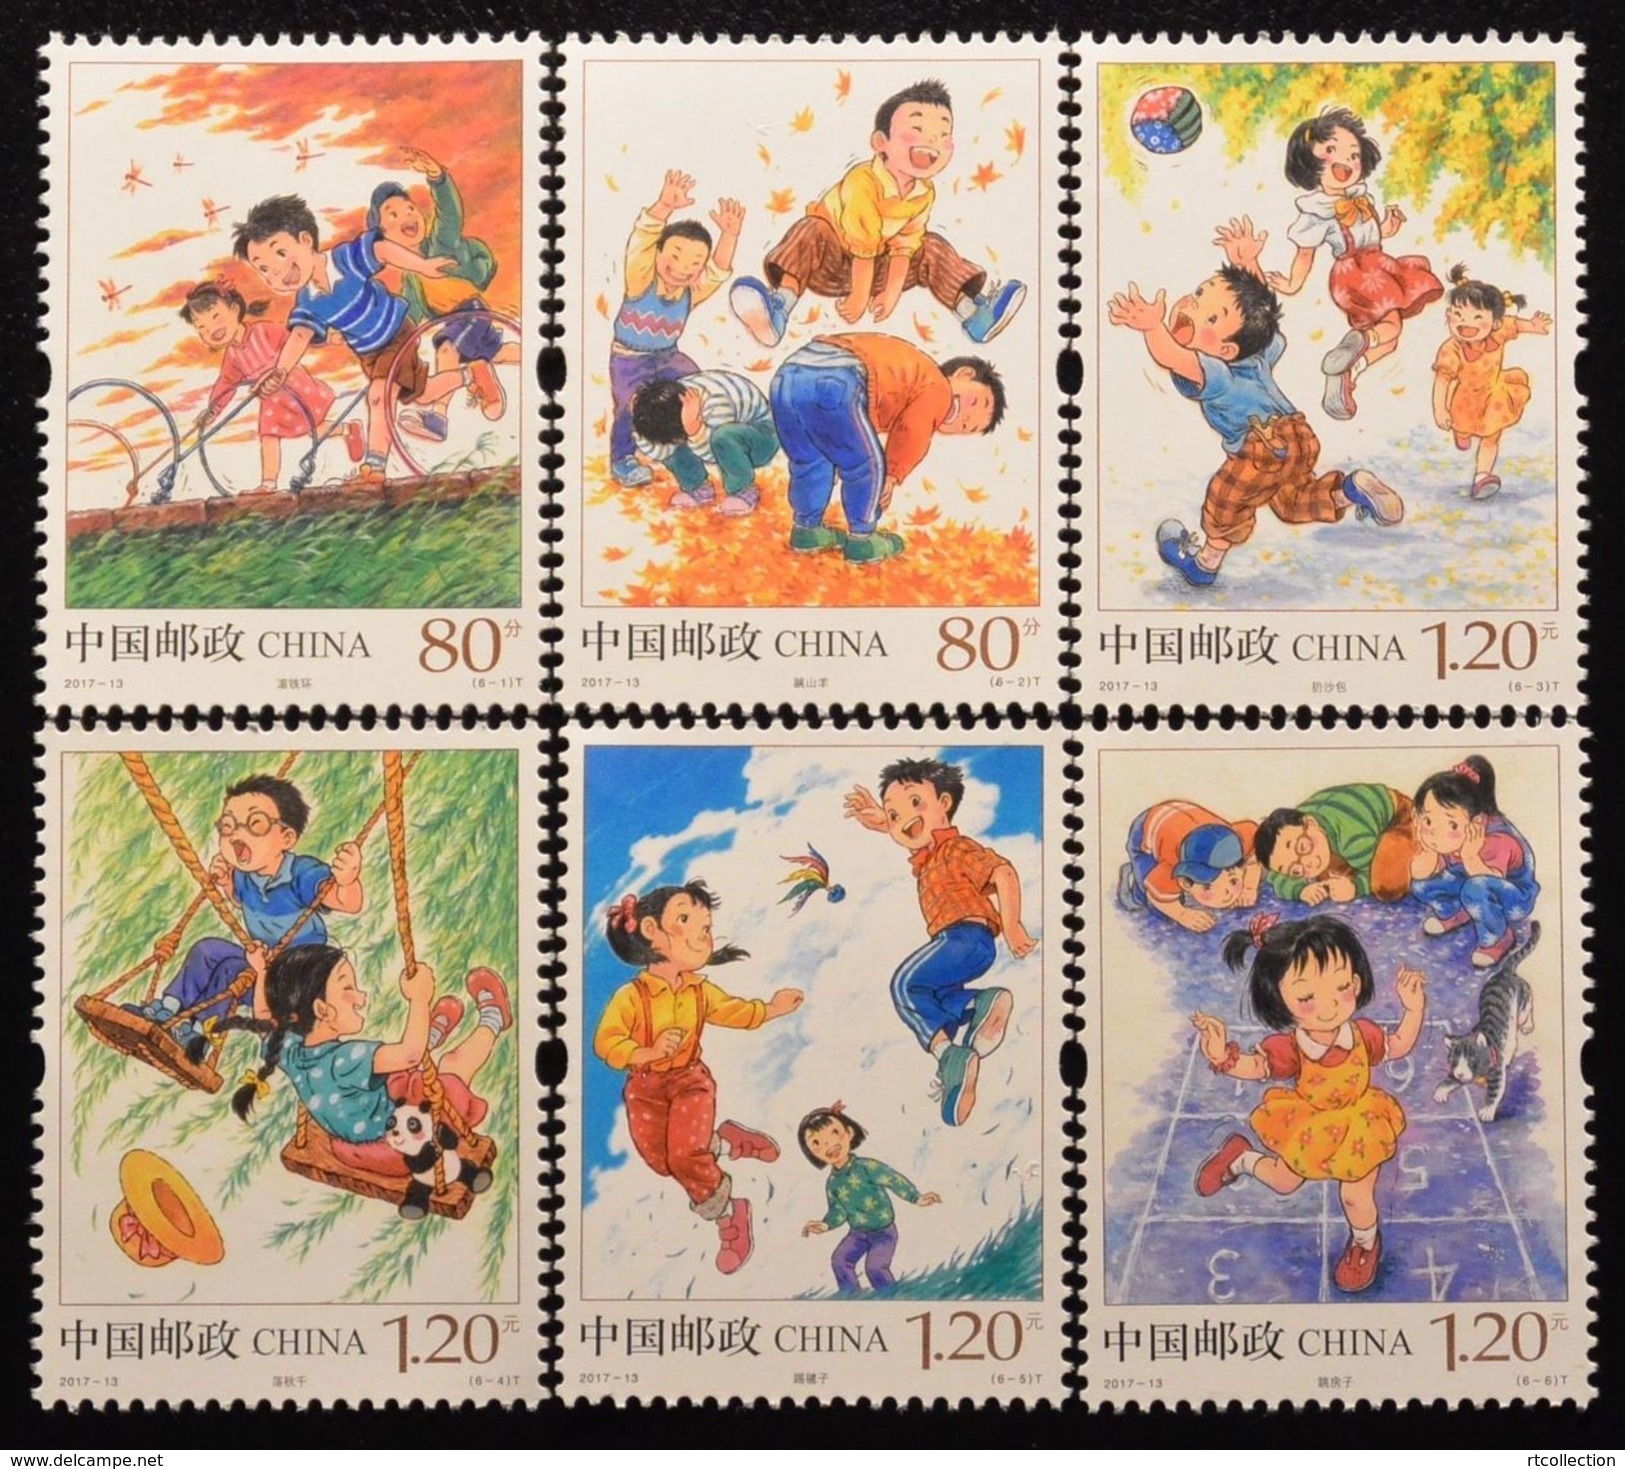 China 2017 - A Set Children's Games Toy Childhood Youth Art Paintings Sports Children Play Cultures Stamps MNH 2017-13 - Unclassified